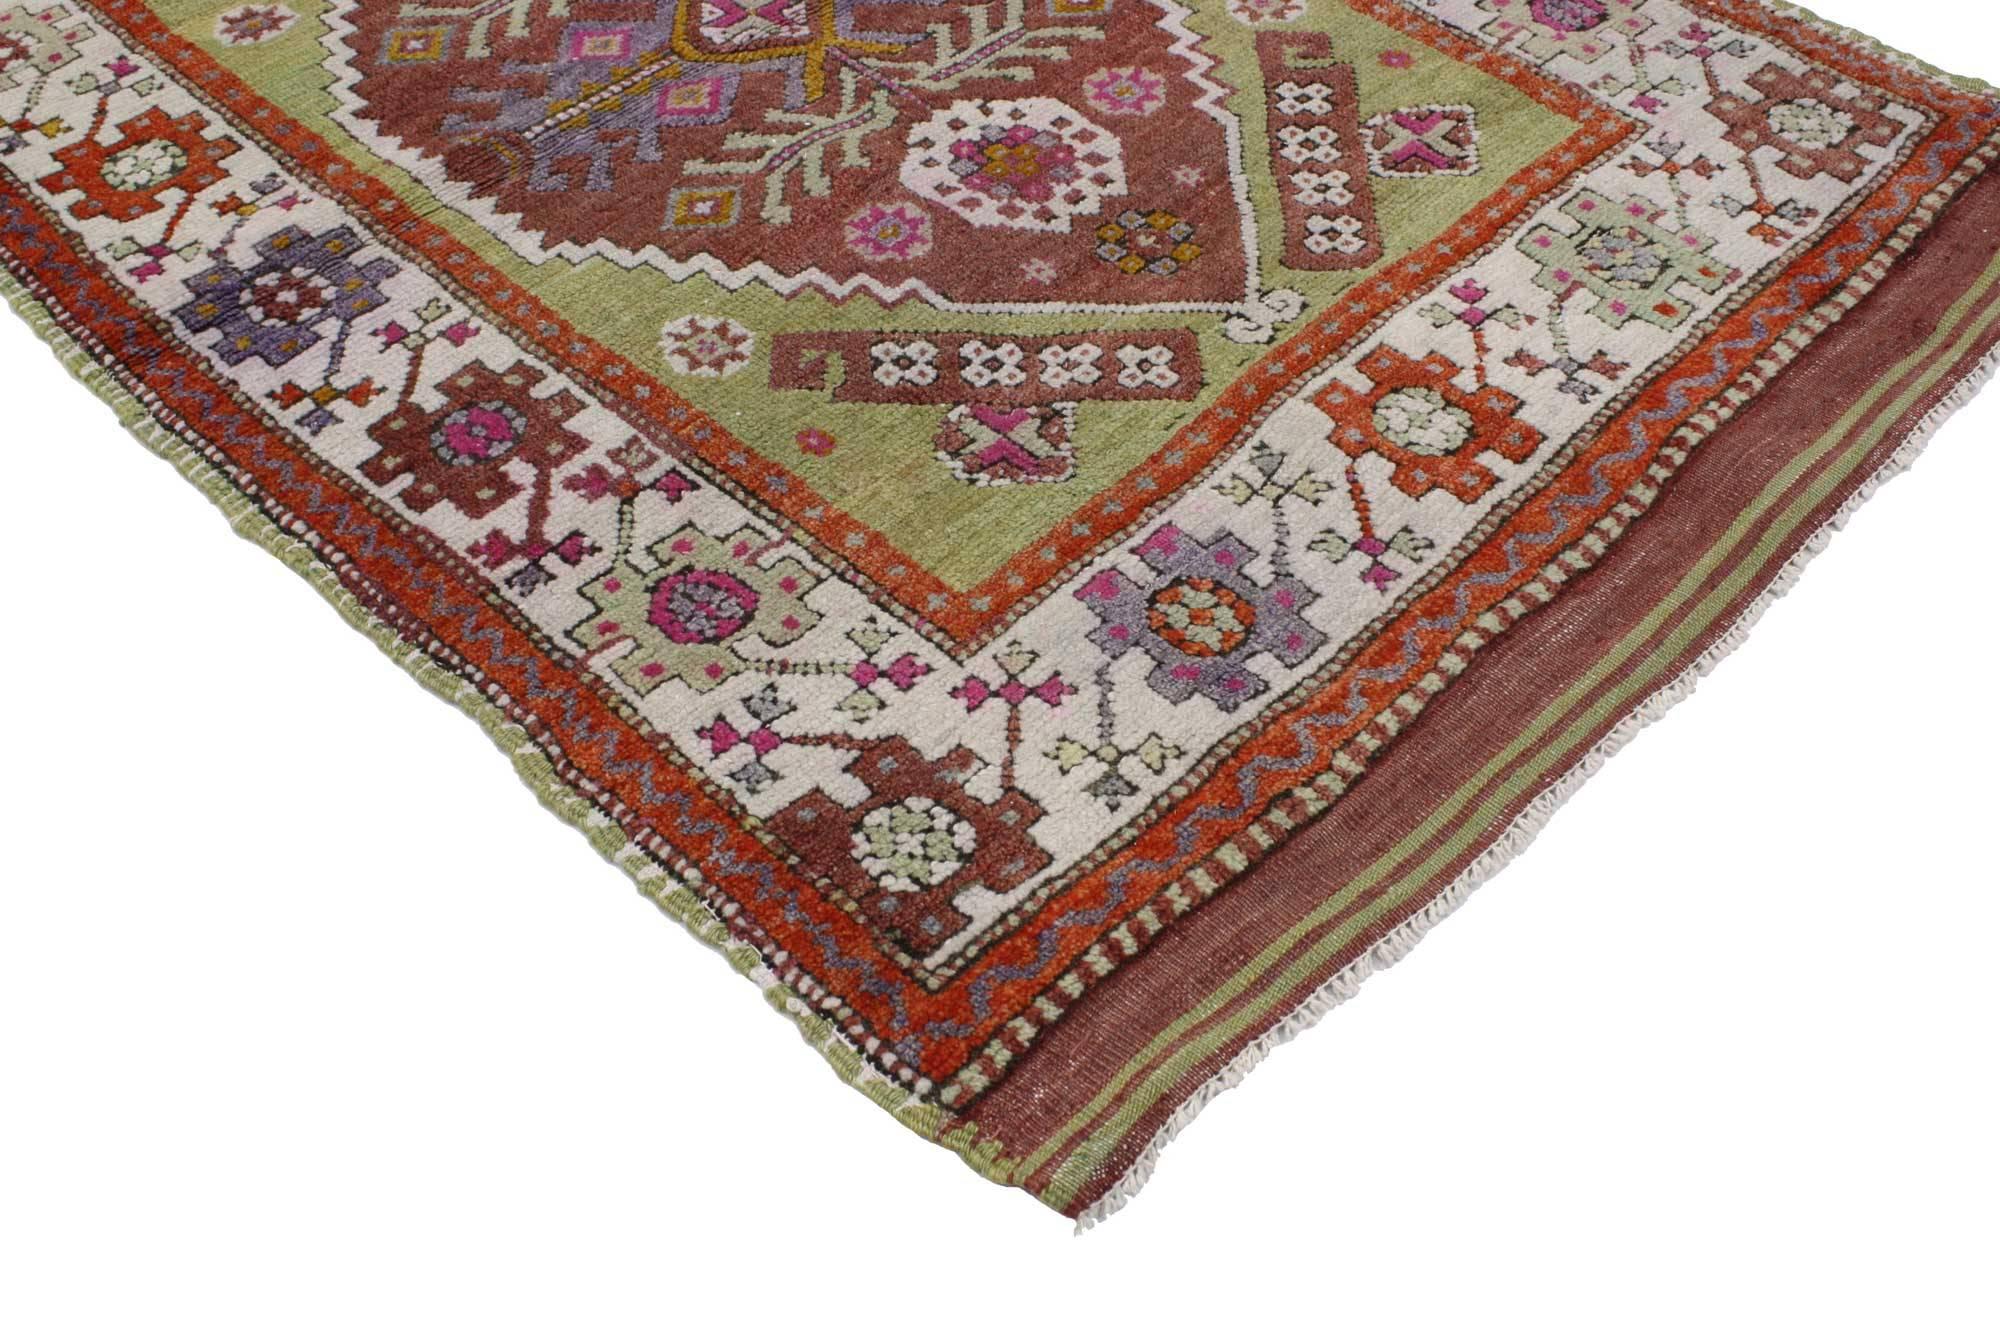 51754, vintage Turkish Oushak rug, colorful rug for kitchen bath, foyer or entryway. This hand-knotted wool vintage Turkish Oushak rug features a modern traditional style. Immersed in Anatolian history and refined colors, this vintage Oushak rug